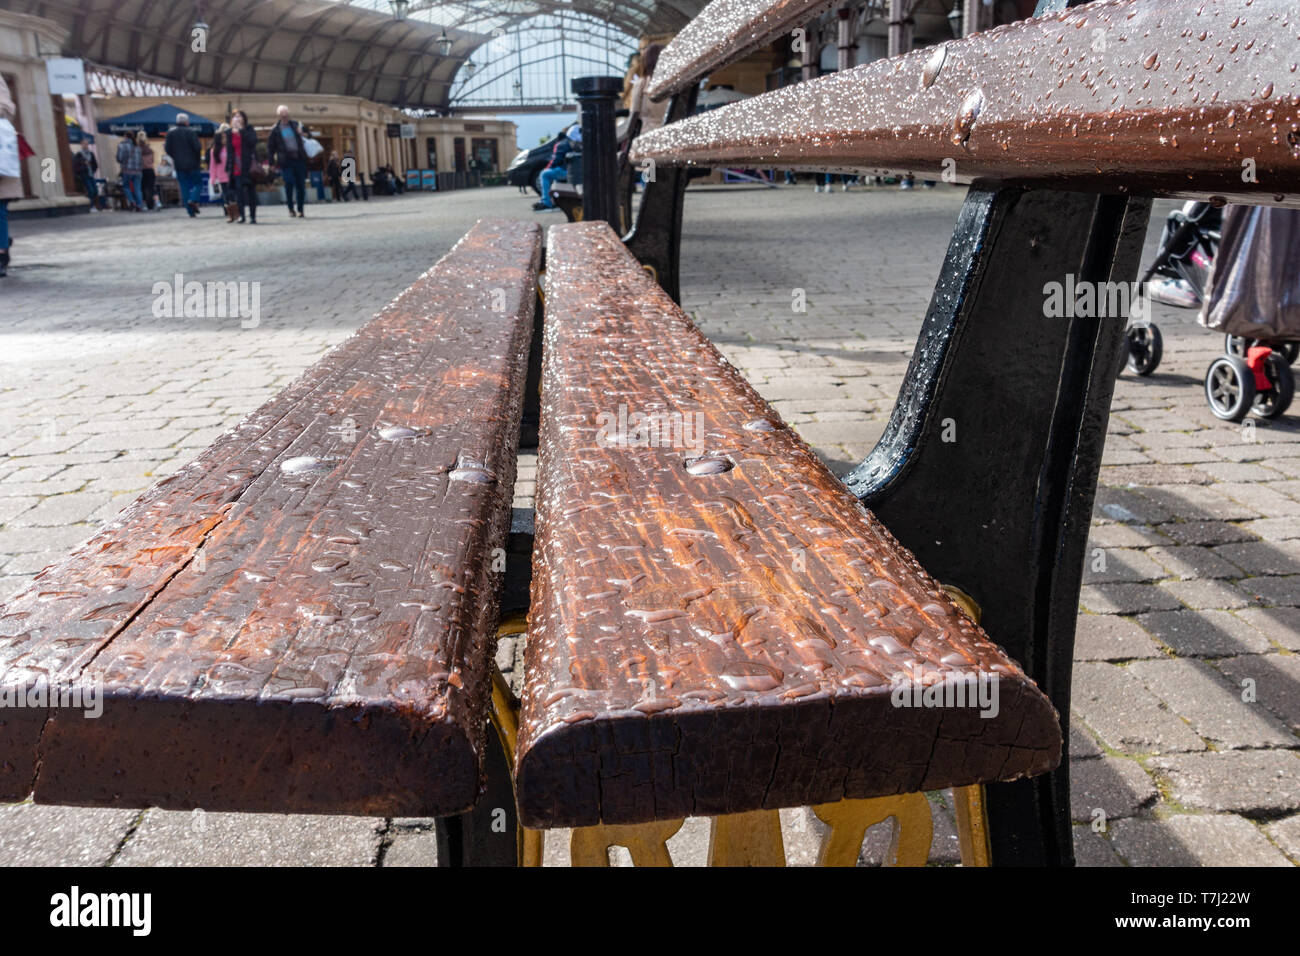 Close up view of a wooden bench which is wet and covered with water droplets following a passing shower. Stock Photo